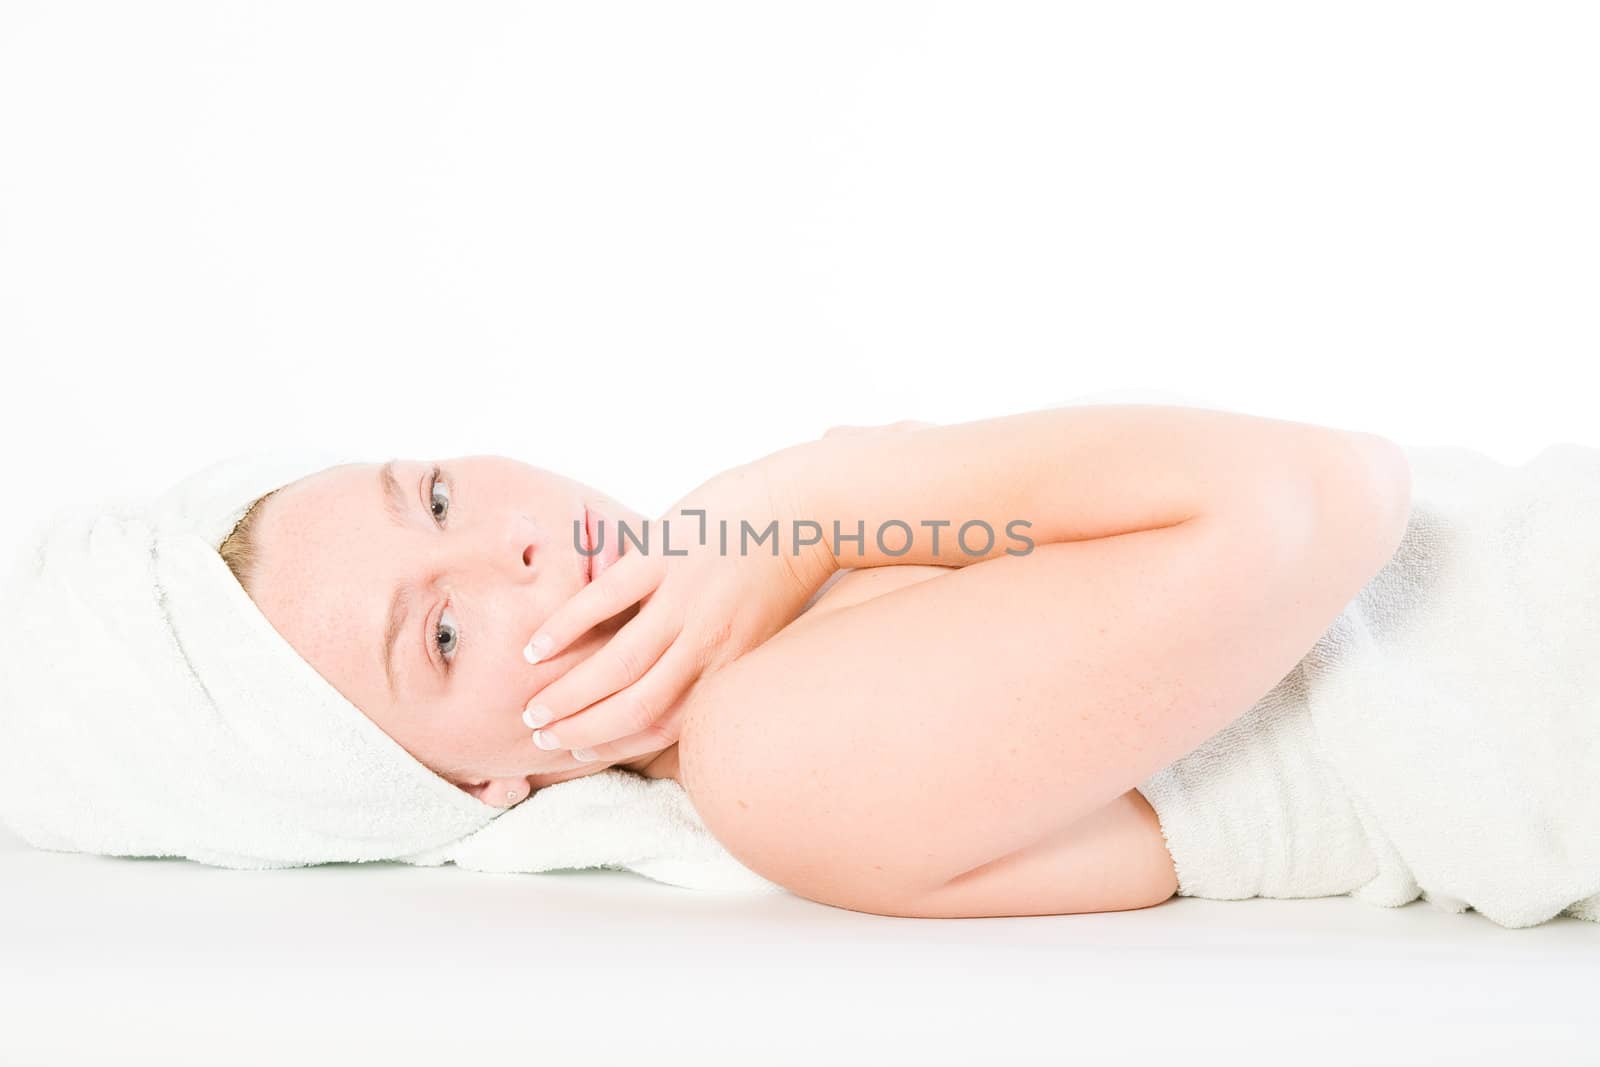 Studio portrait of a spa girl touching her face